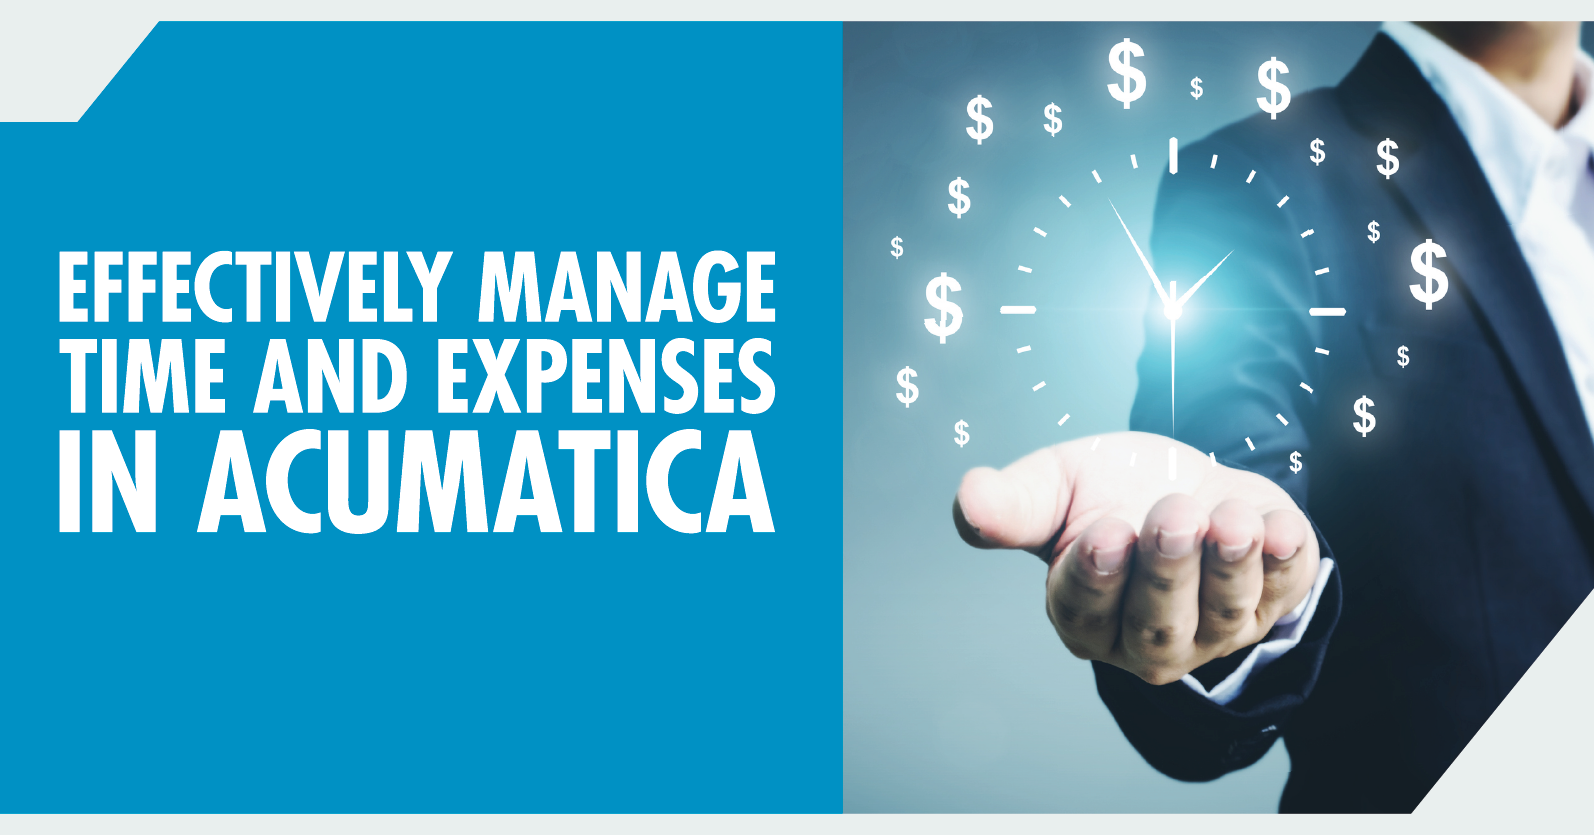 Effectively Manage Time and Expenses in Acumatica